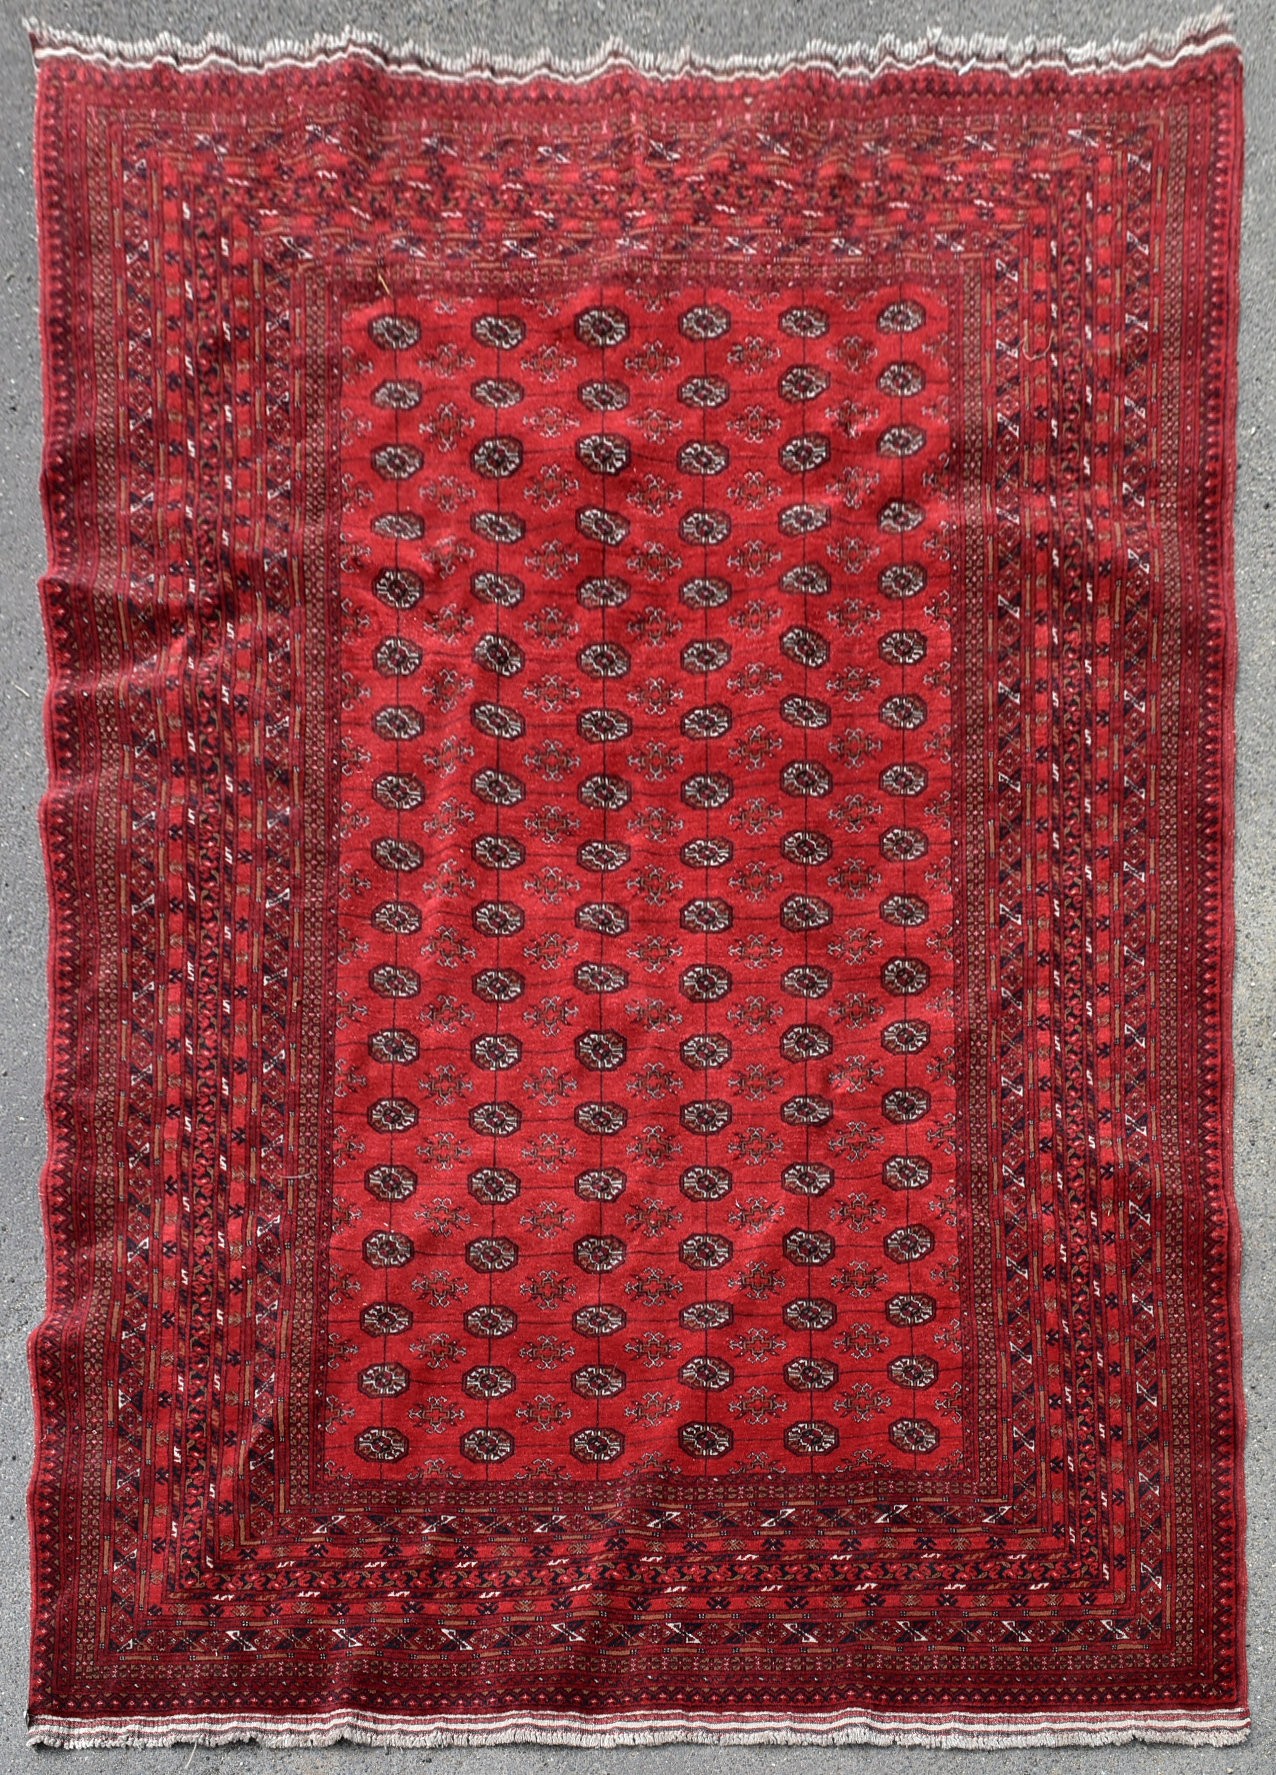 An Afghan Bokhara carpet with repeating gul motifs across the madder field enclosed by geometric